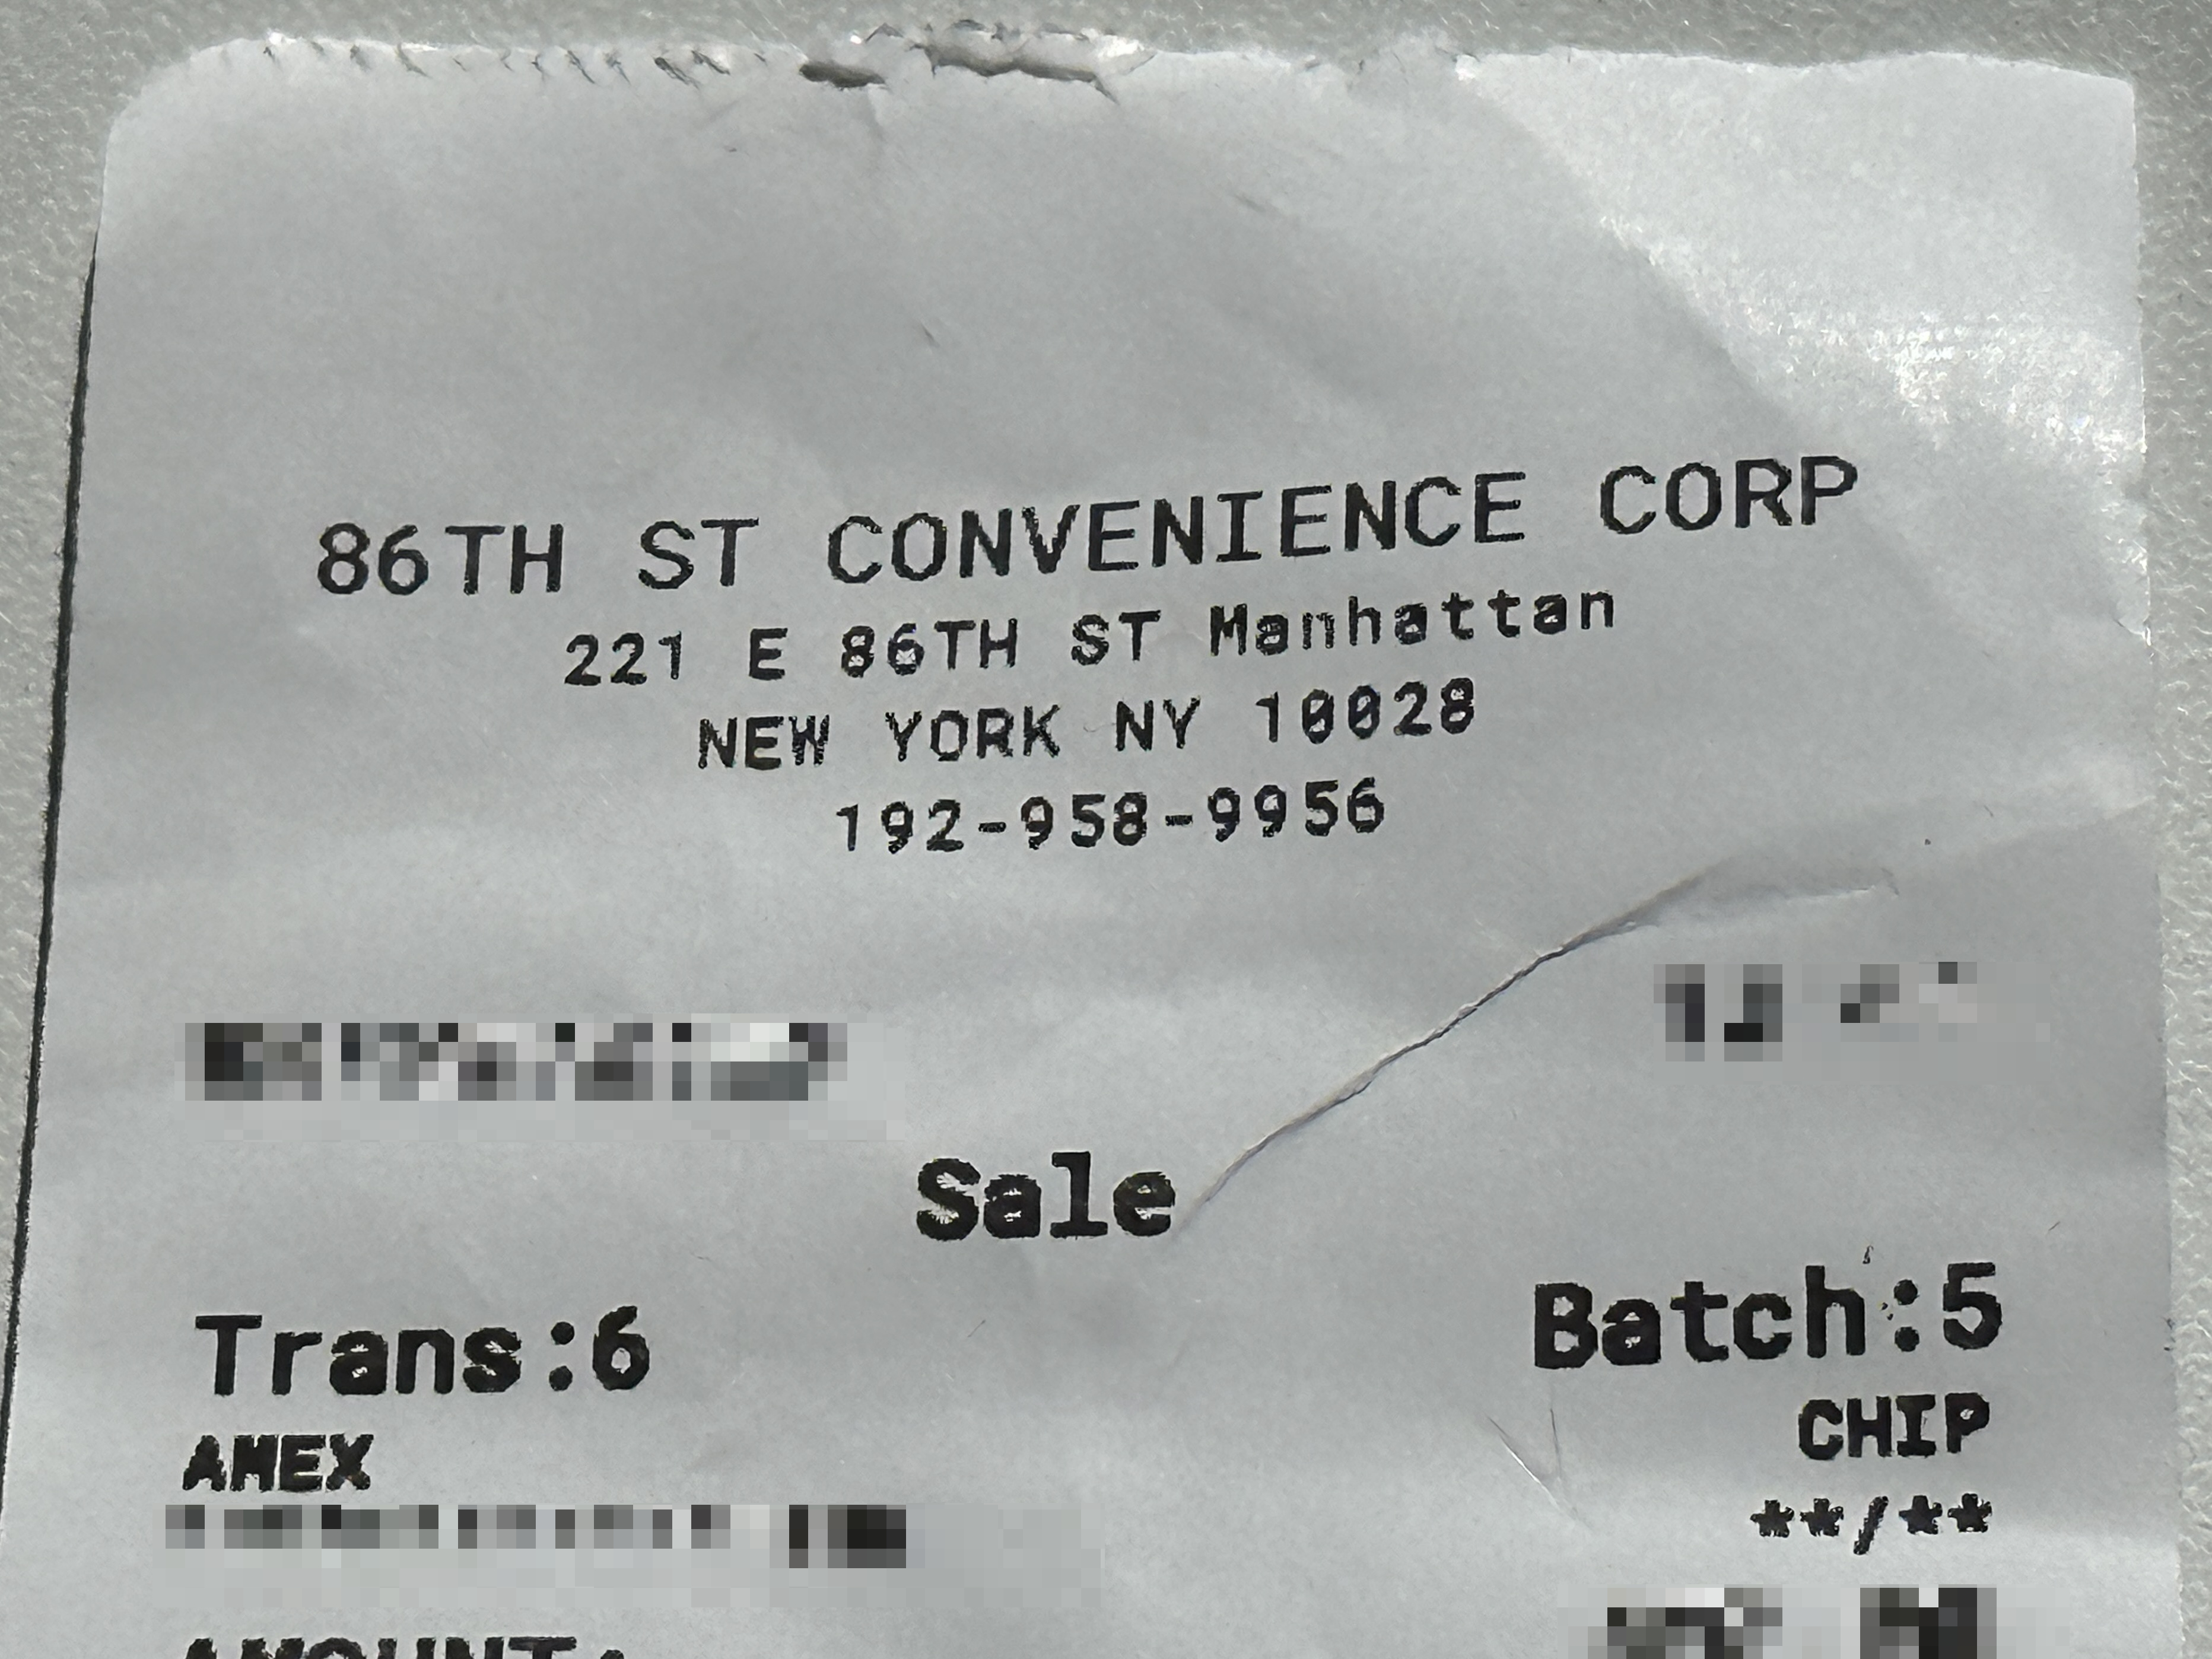 Credit card receipts from Best Budz state the business name is 86th St Convenience Corp | Upper East Site